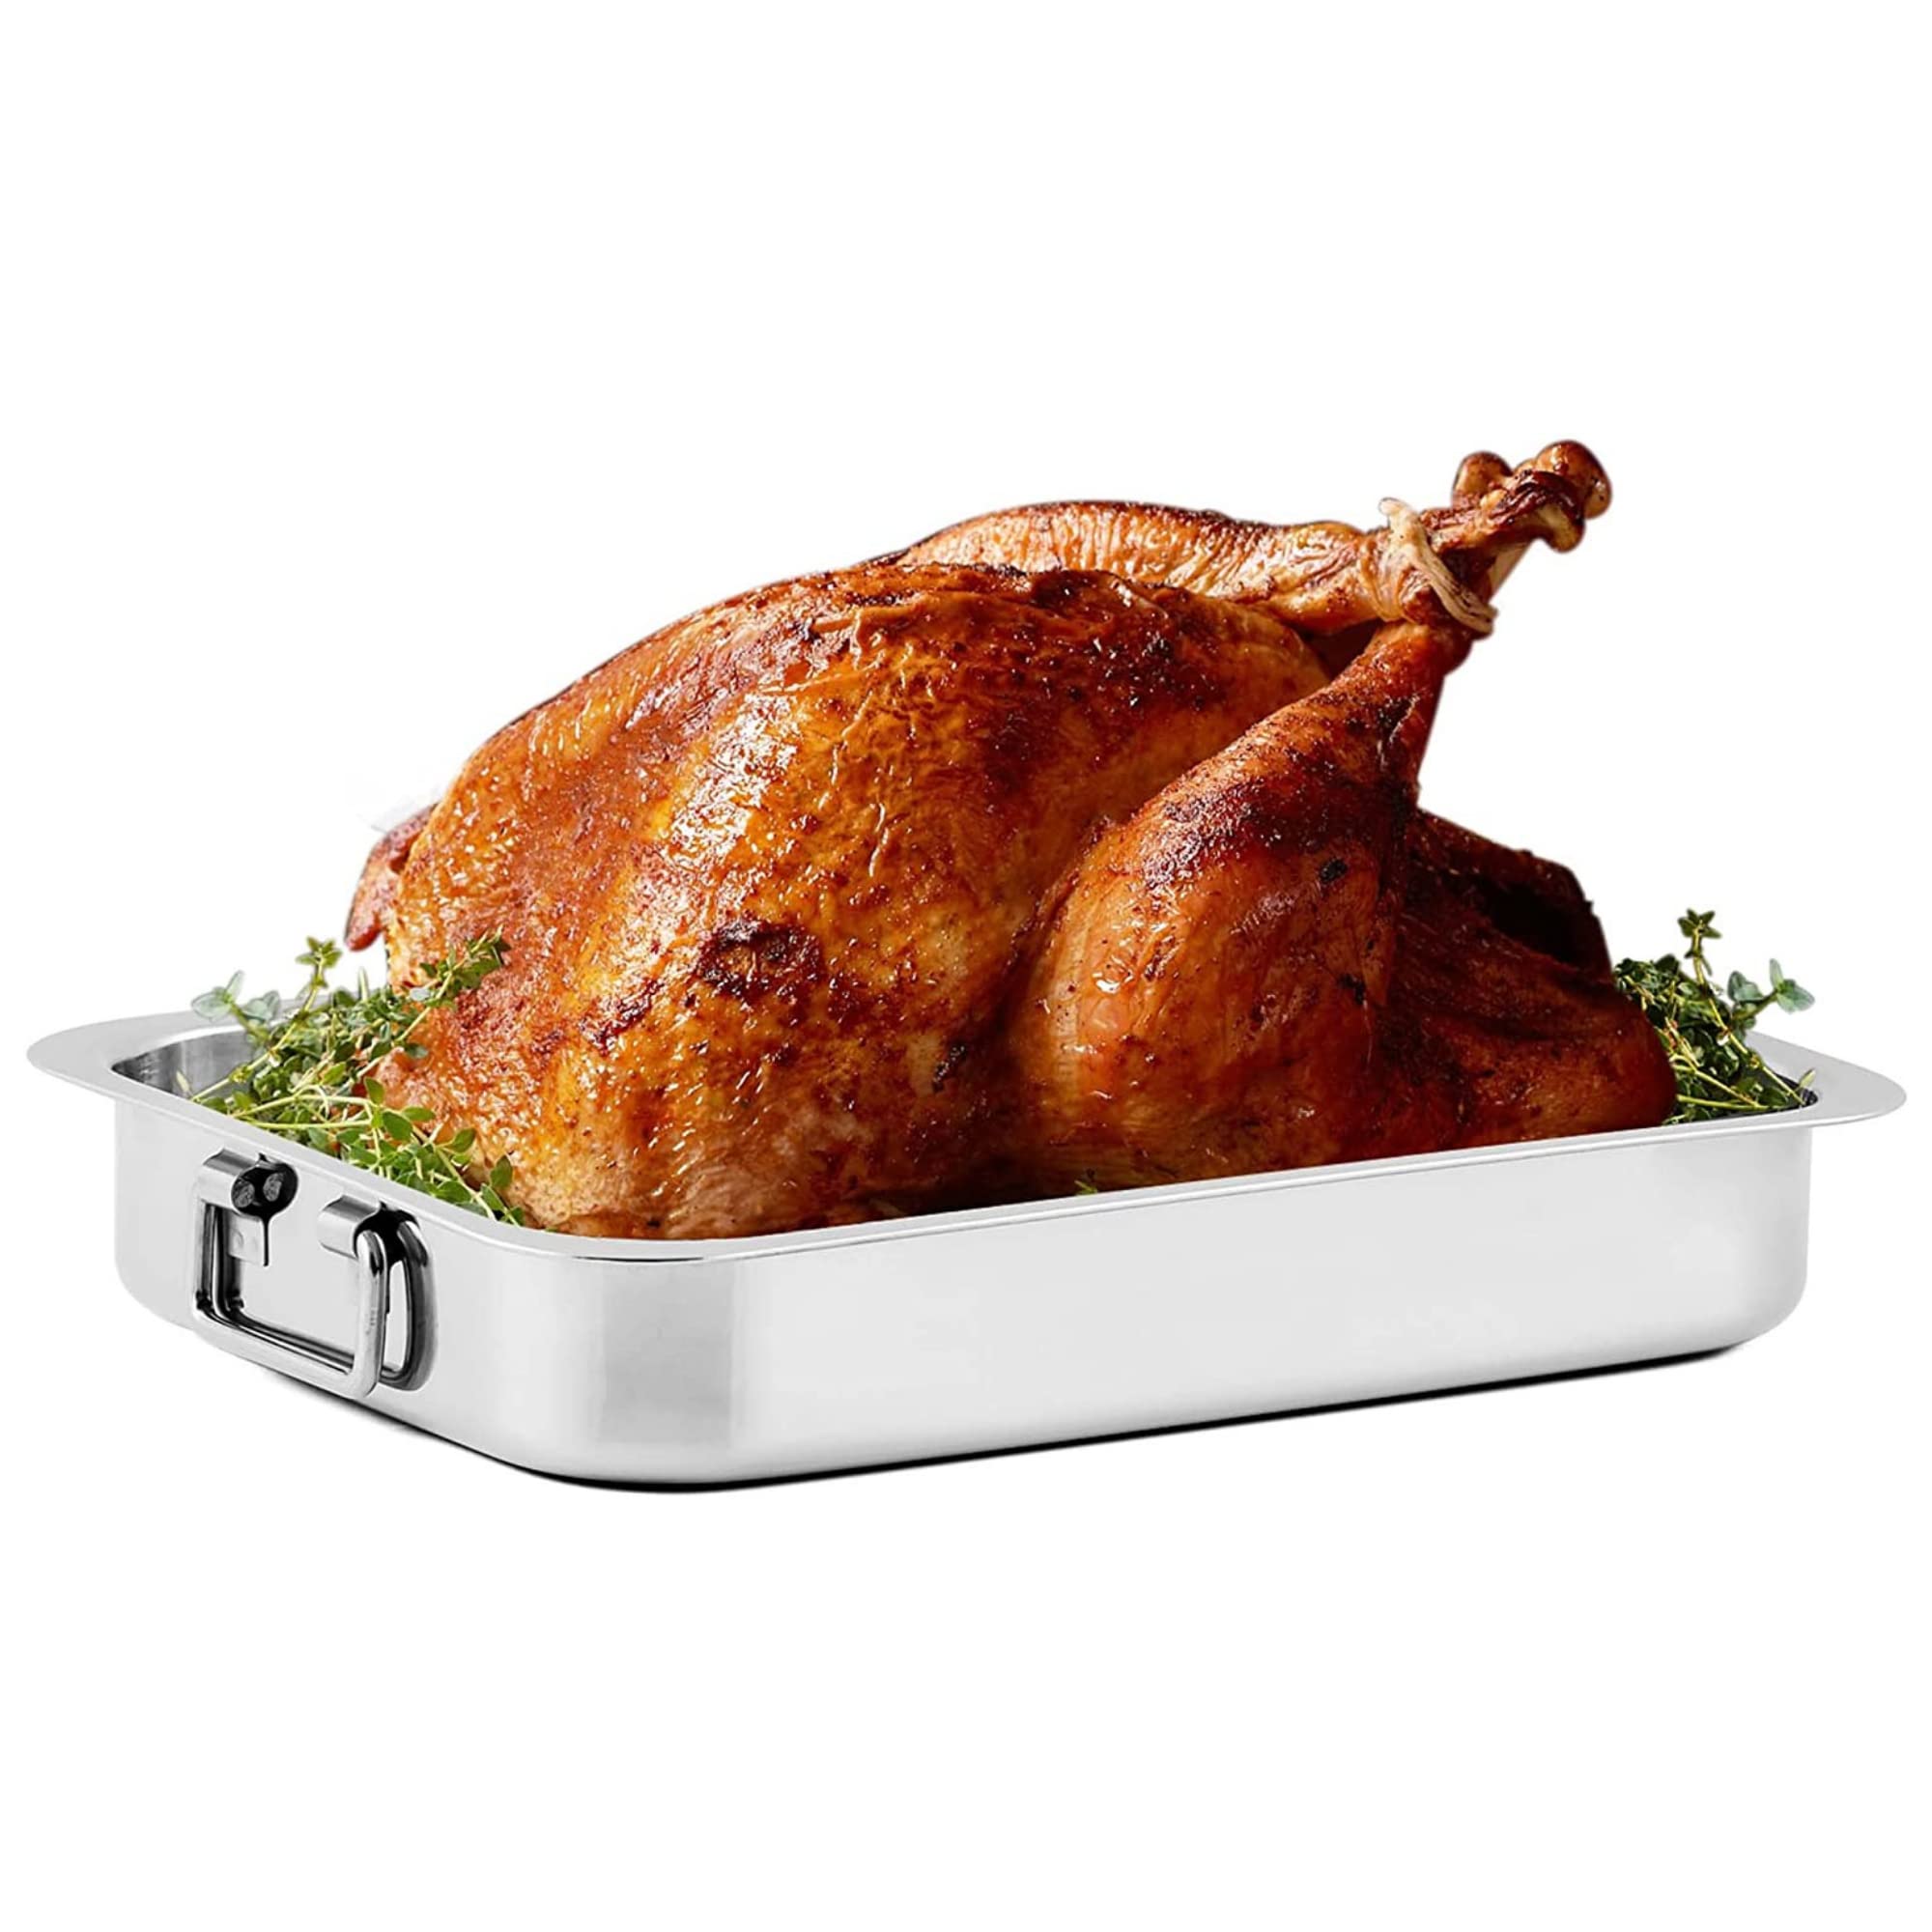 Ovente Kitchen Oven Roasting Pan 13 x 9.4 Inch Stainless Steel Portable Baking Tray with Rack and Handle, Easy to Clean Dishwasher Safe Perfect for Cooking Turkey Roast Beef Fish, Silver CWR23131S